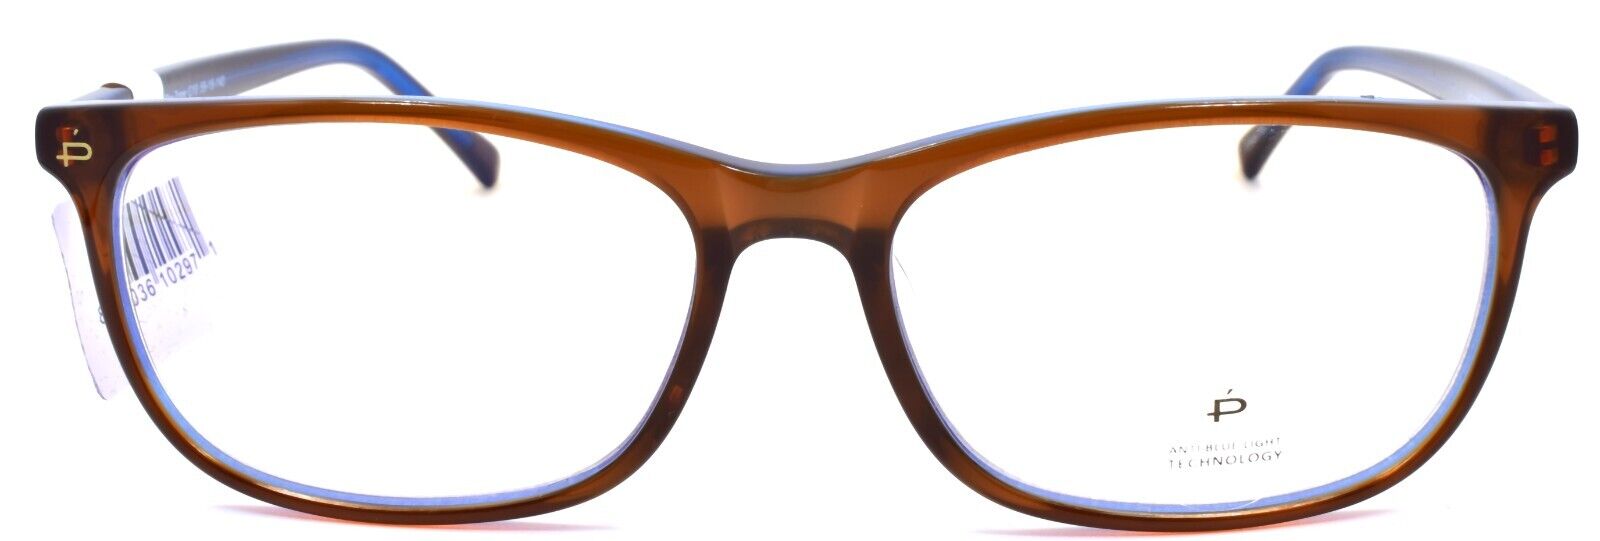 2-Prive Revaux In The Zone Eyeglasses Blue Light Blocking RX-ready Brown / Blue-810036102971-IKSpecs